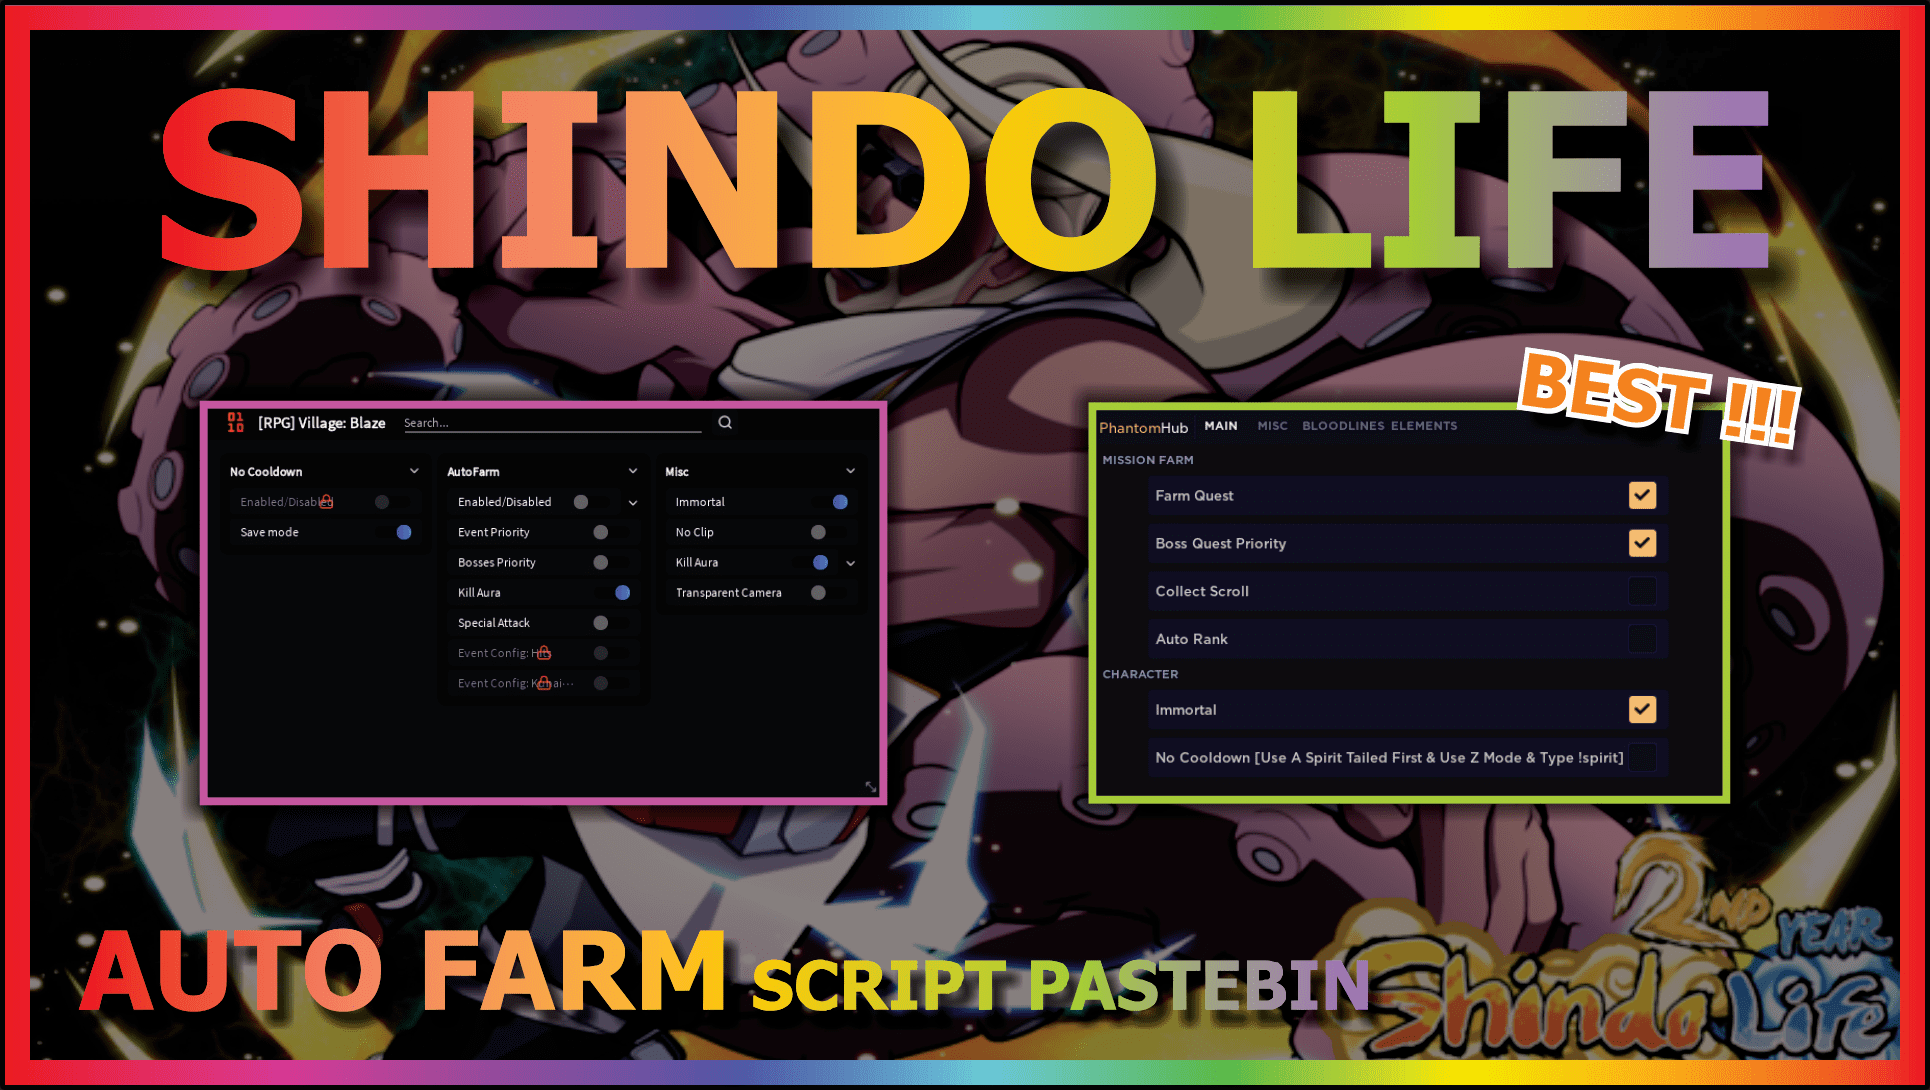 Shindo Life Commands Full and Updated list « HDG